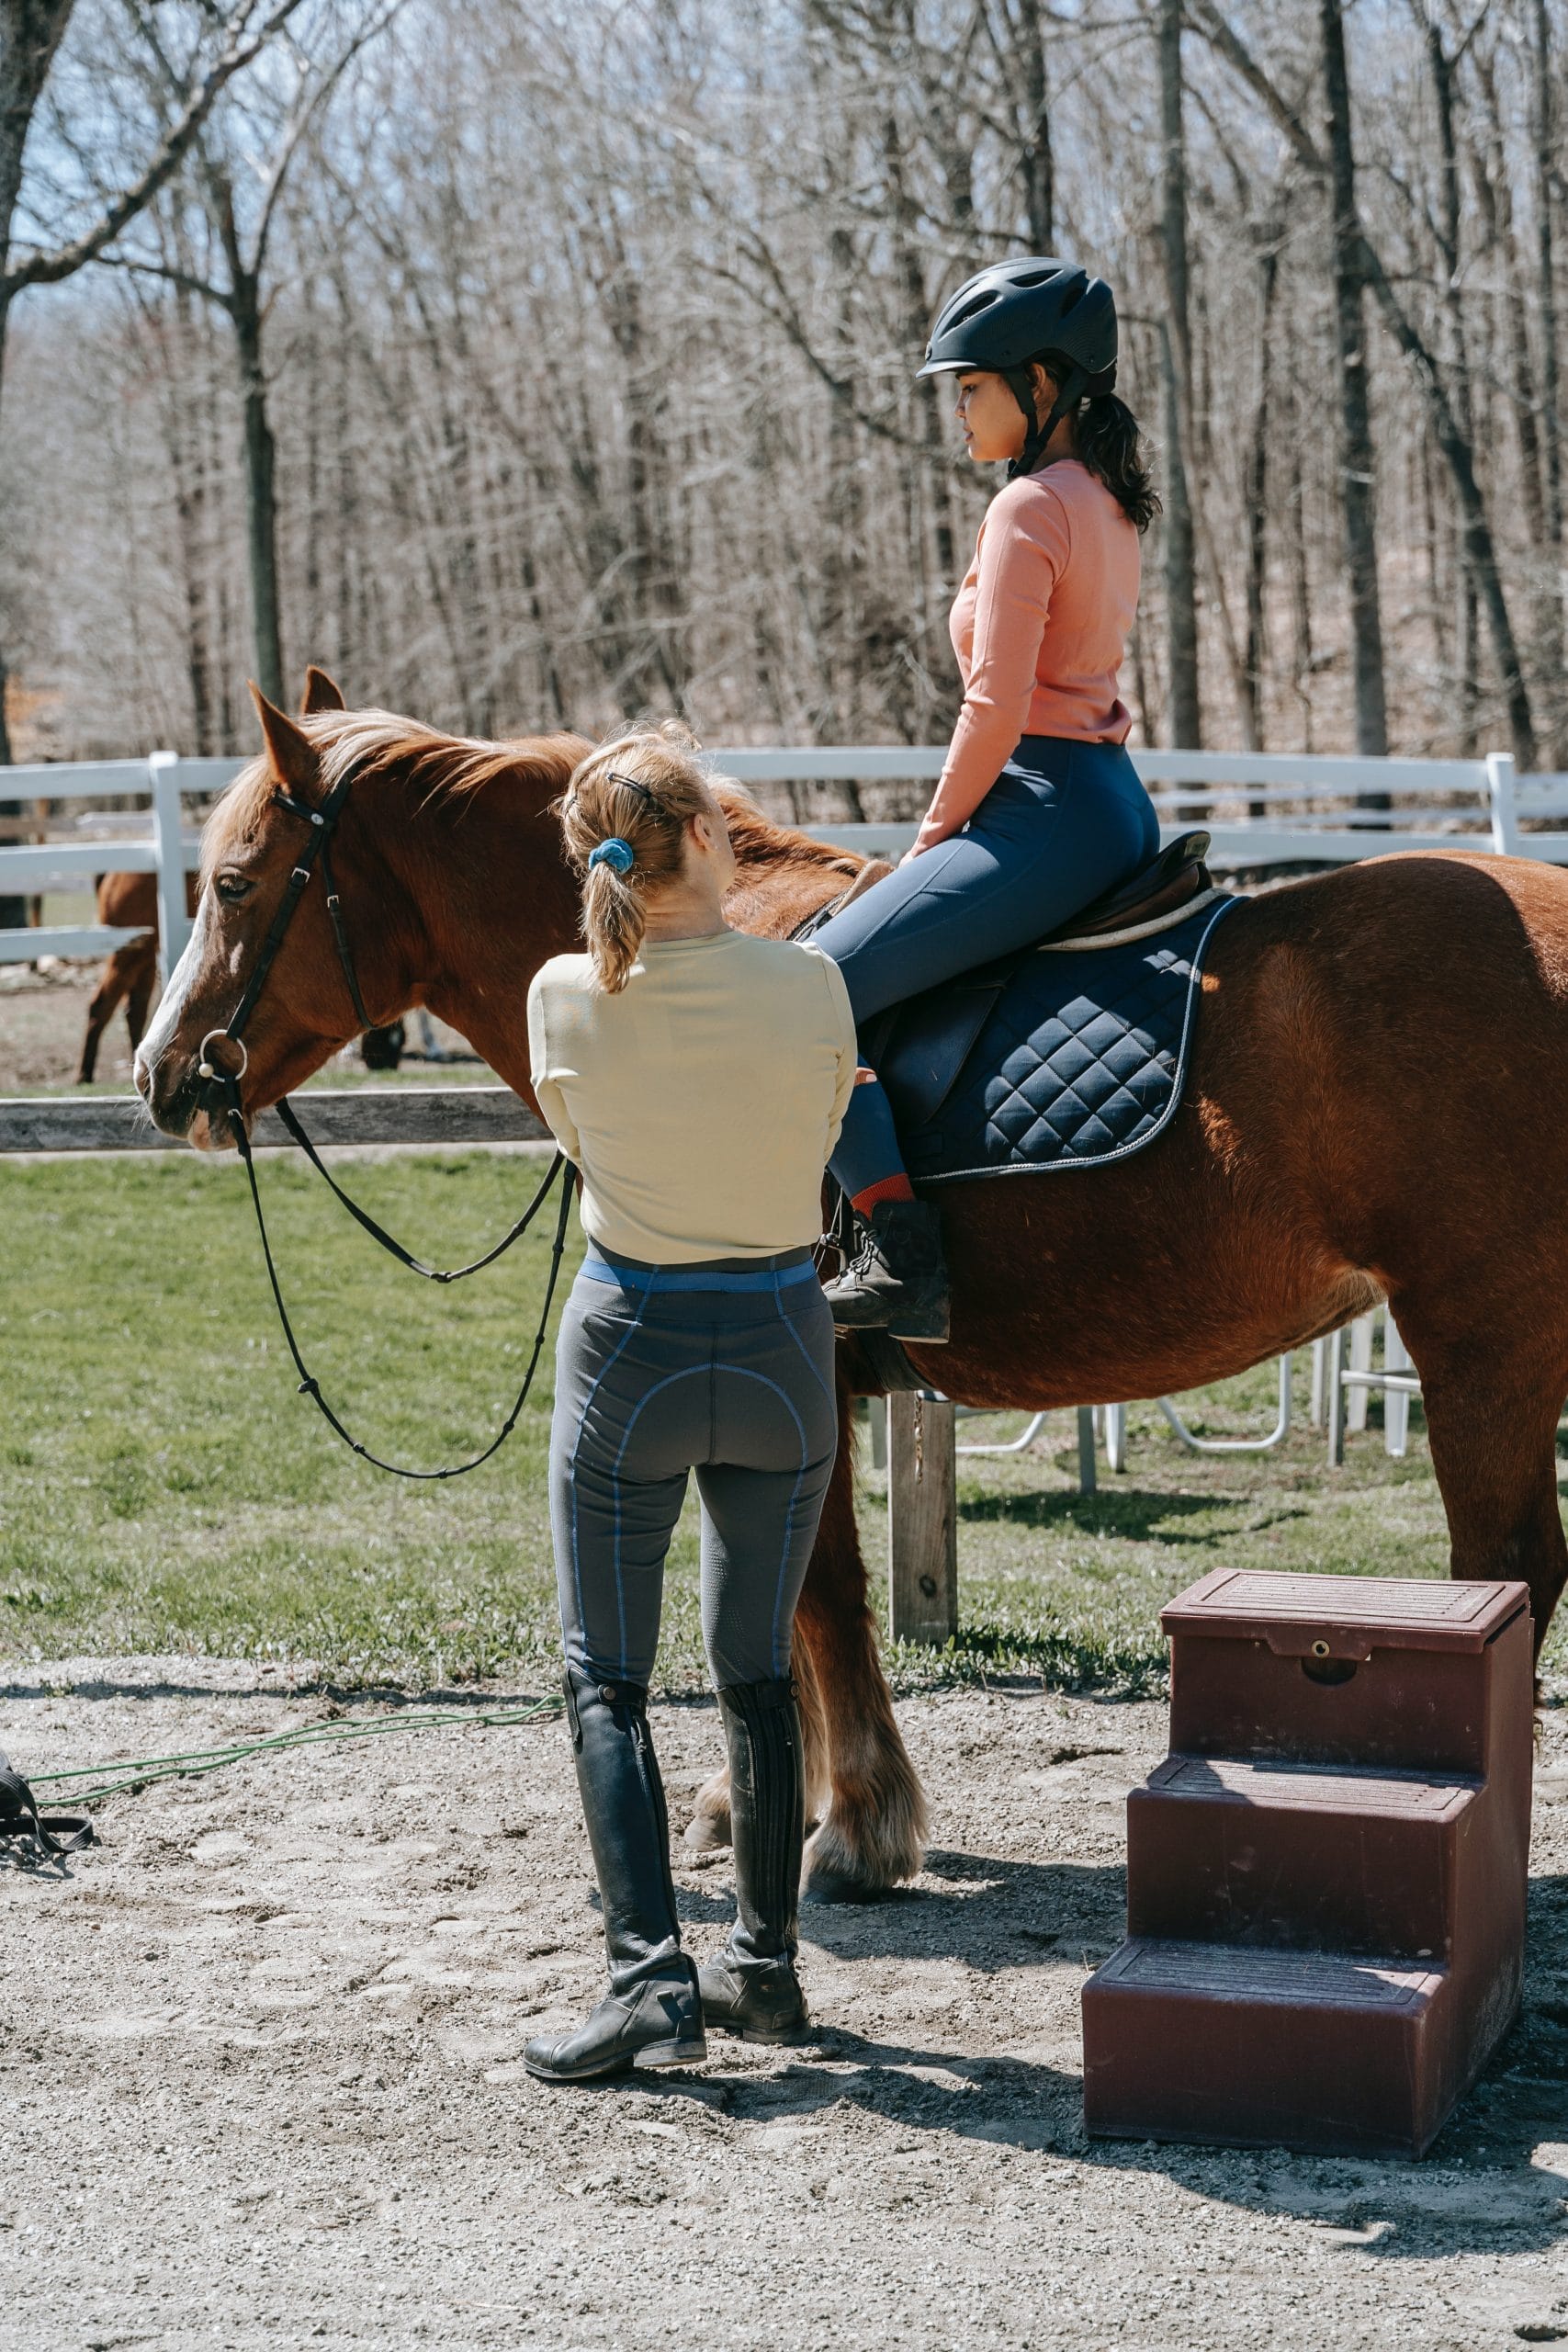 A female being helped up onto a brown horse. There are a set of steps nearby, and another female adjusting the reins.